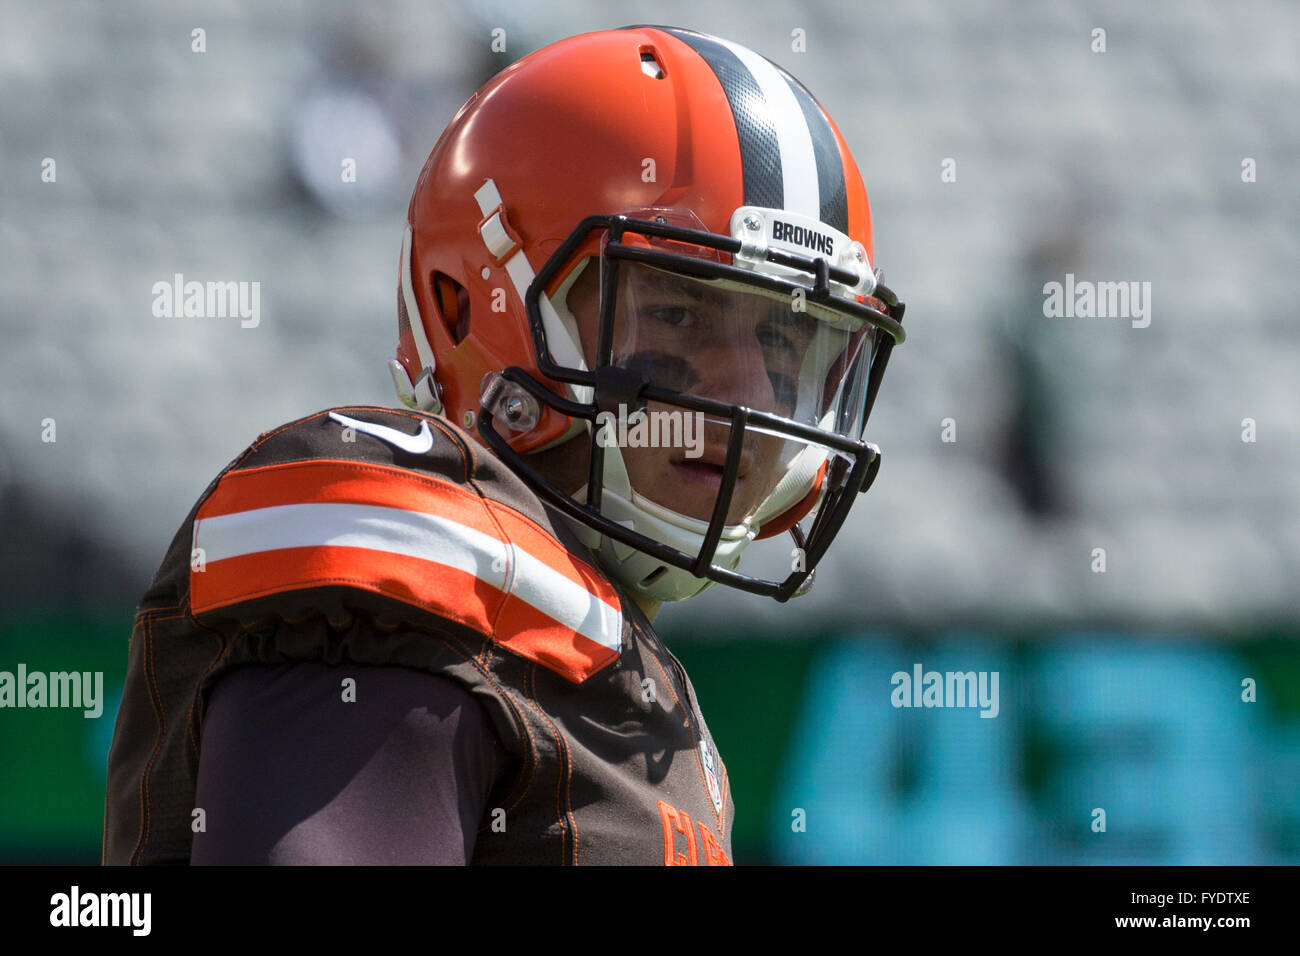 April 26, 2016 - Former Cleveland Browns quarterback Johnny Manziel indicted for domestic violence by a Dallas grand jury. Pictured: September 13, 2015, Cleveland Browns quarterback Johnny Manziel (2) looks on prior to the NFL game between the Cleveland Browns and the New York Jets at MetLife Stadium in East Rutherford, New Jersey. Christopher Szagola/CSM © Cal Sport Media/Alamy Live News Stock Photo